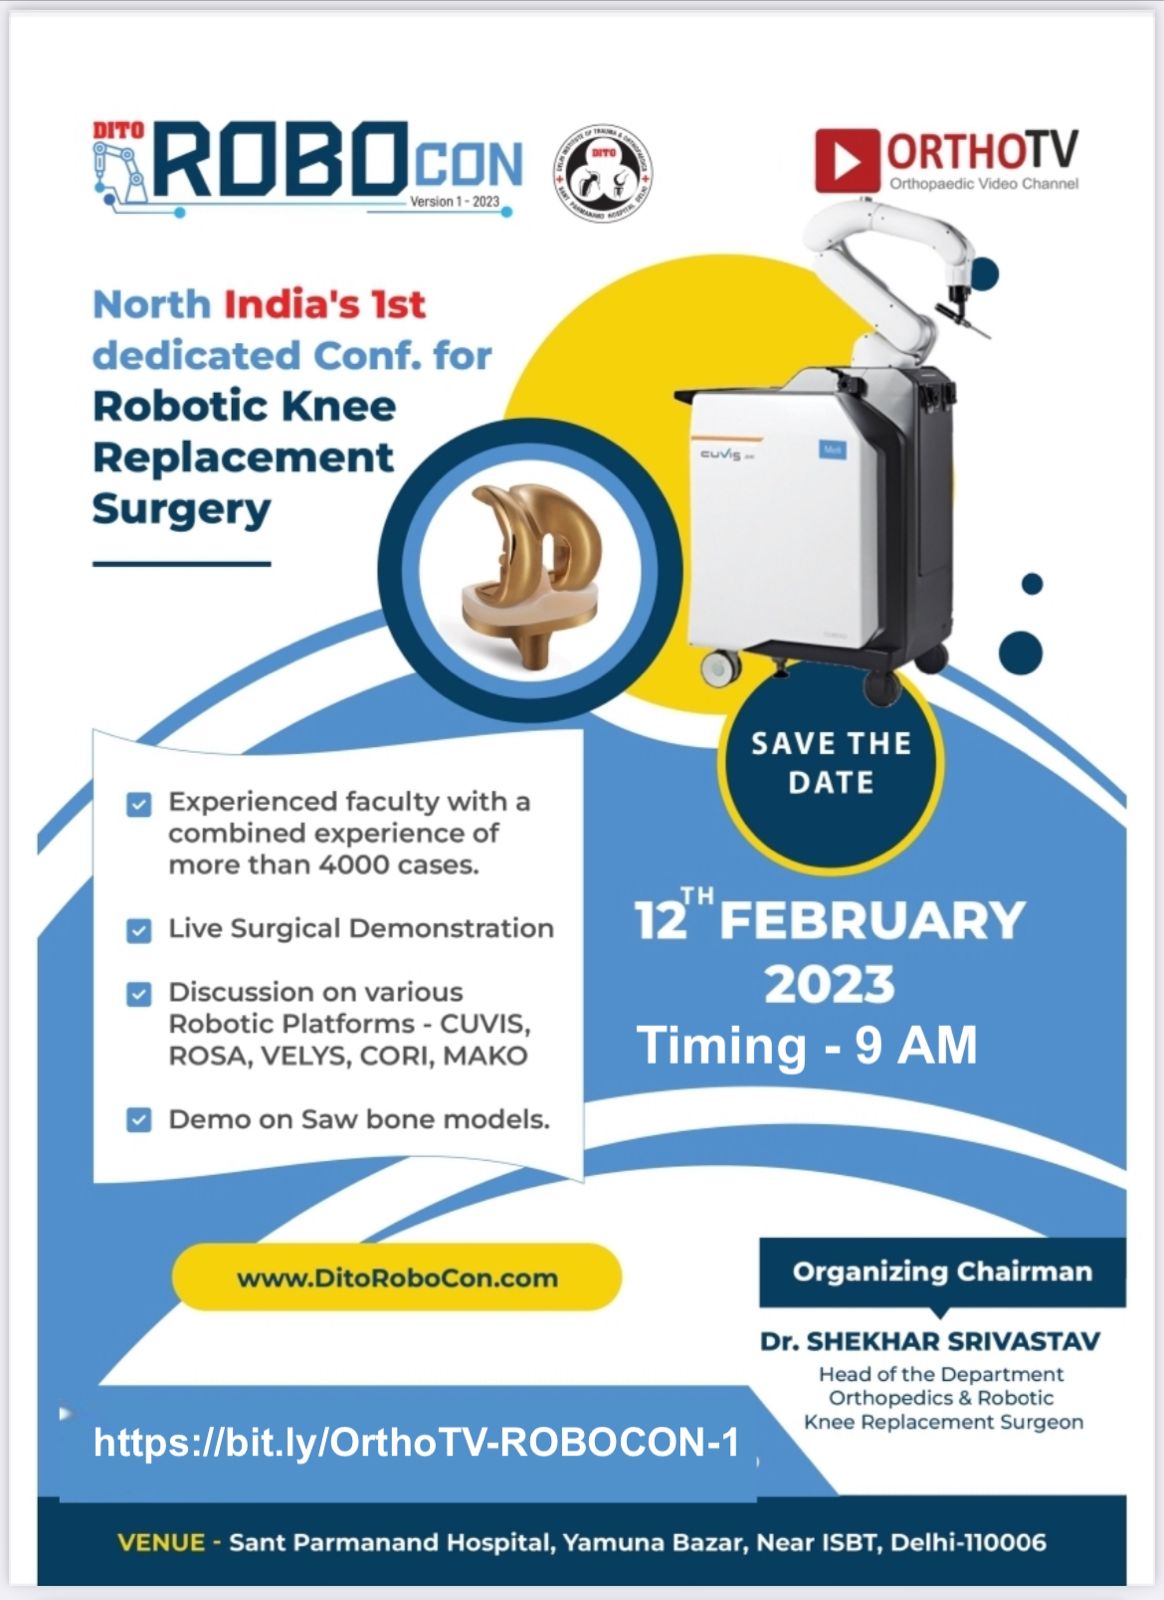 ROBOCON North India's 1st dedicated Conf. for Robotic Knee Replacement Surgery Dr. SHEKHAR SRIVASTAV